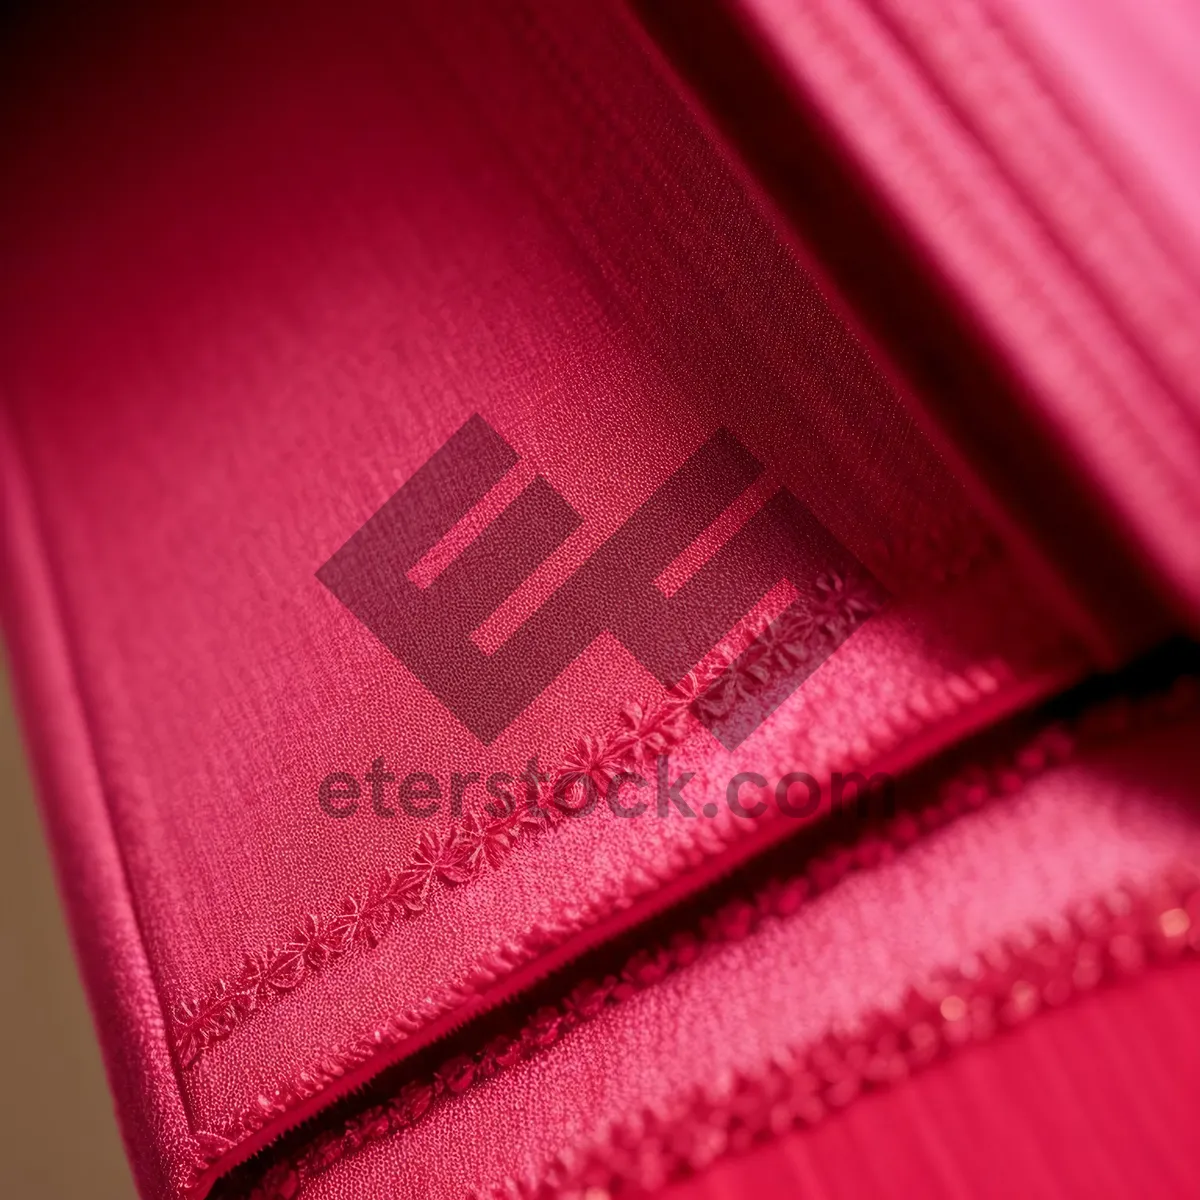 Picture of Colorful Satin Fabric Texture Design